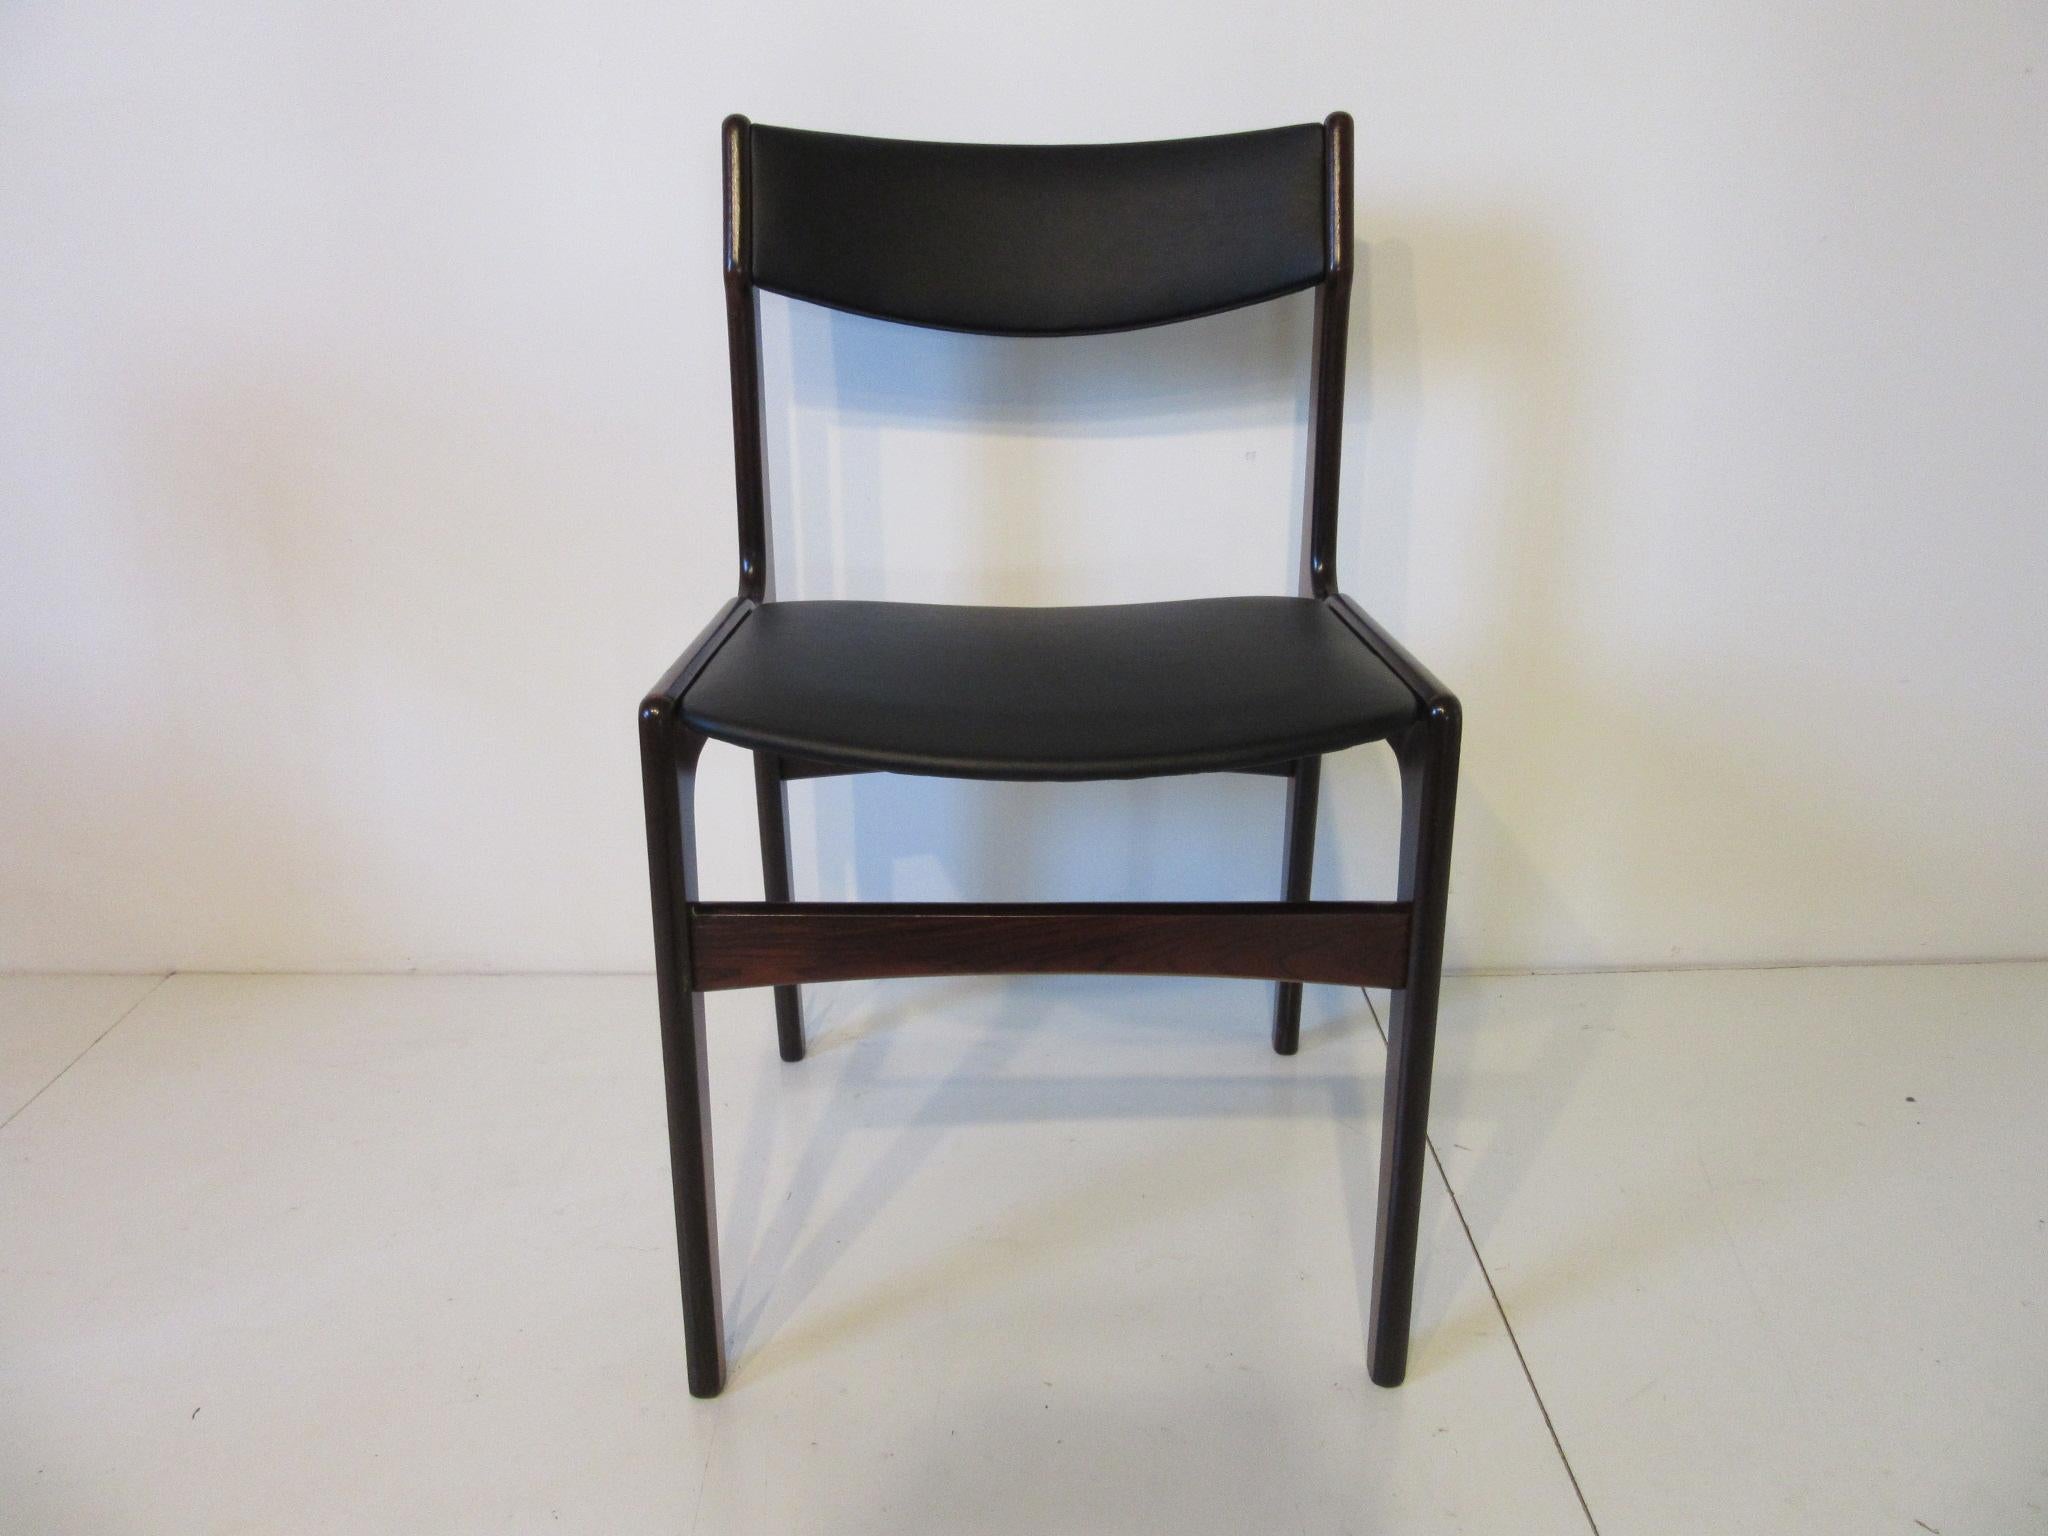 A set of four Brazilian rosewood framed Danish dining chairs reupholstered in a soft black leatherette in the manner of Erik Buck. A rich mix of rosewood and satin black fabric that makes these so perfect for that warm dining space .